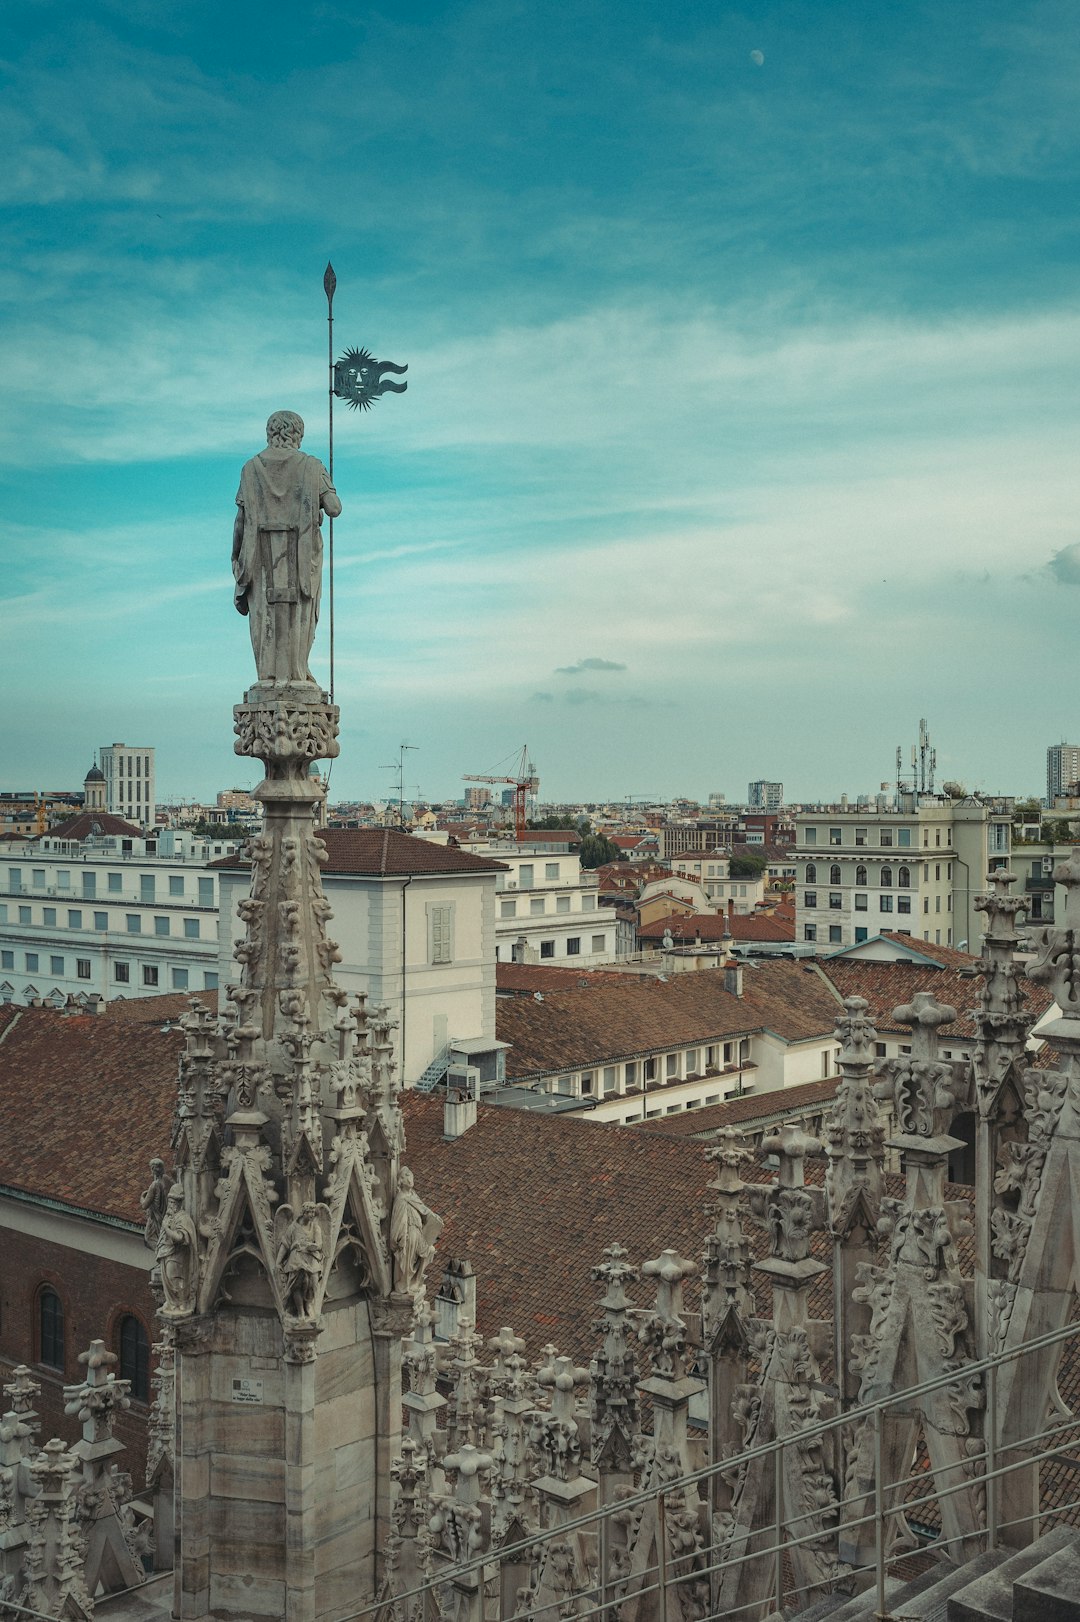 The roofs of Milan from the Duomo di Milano.